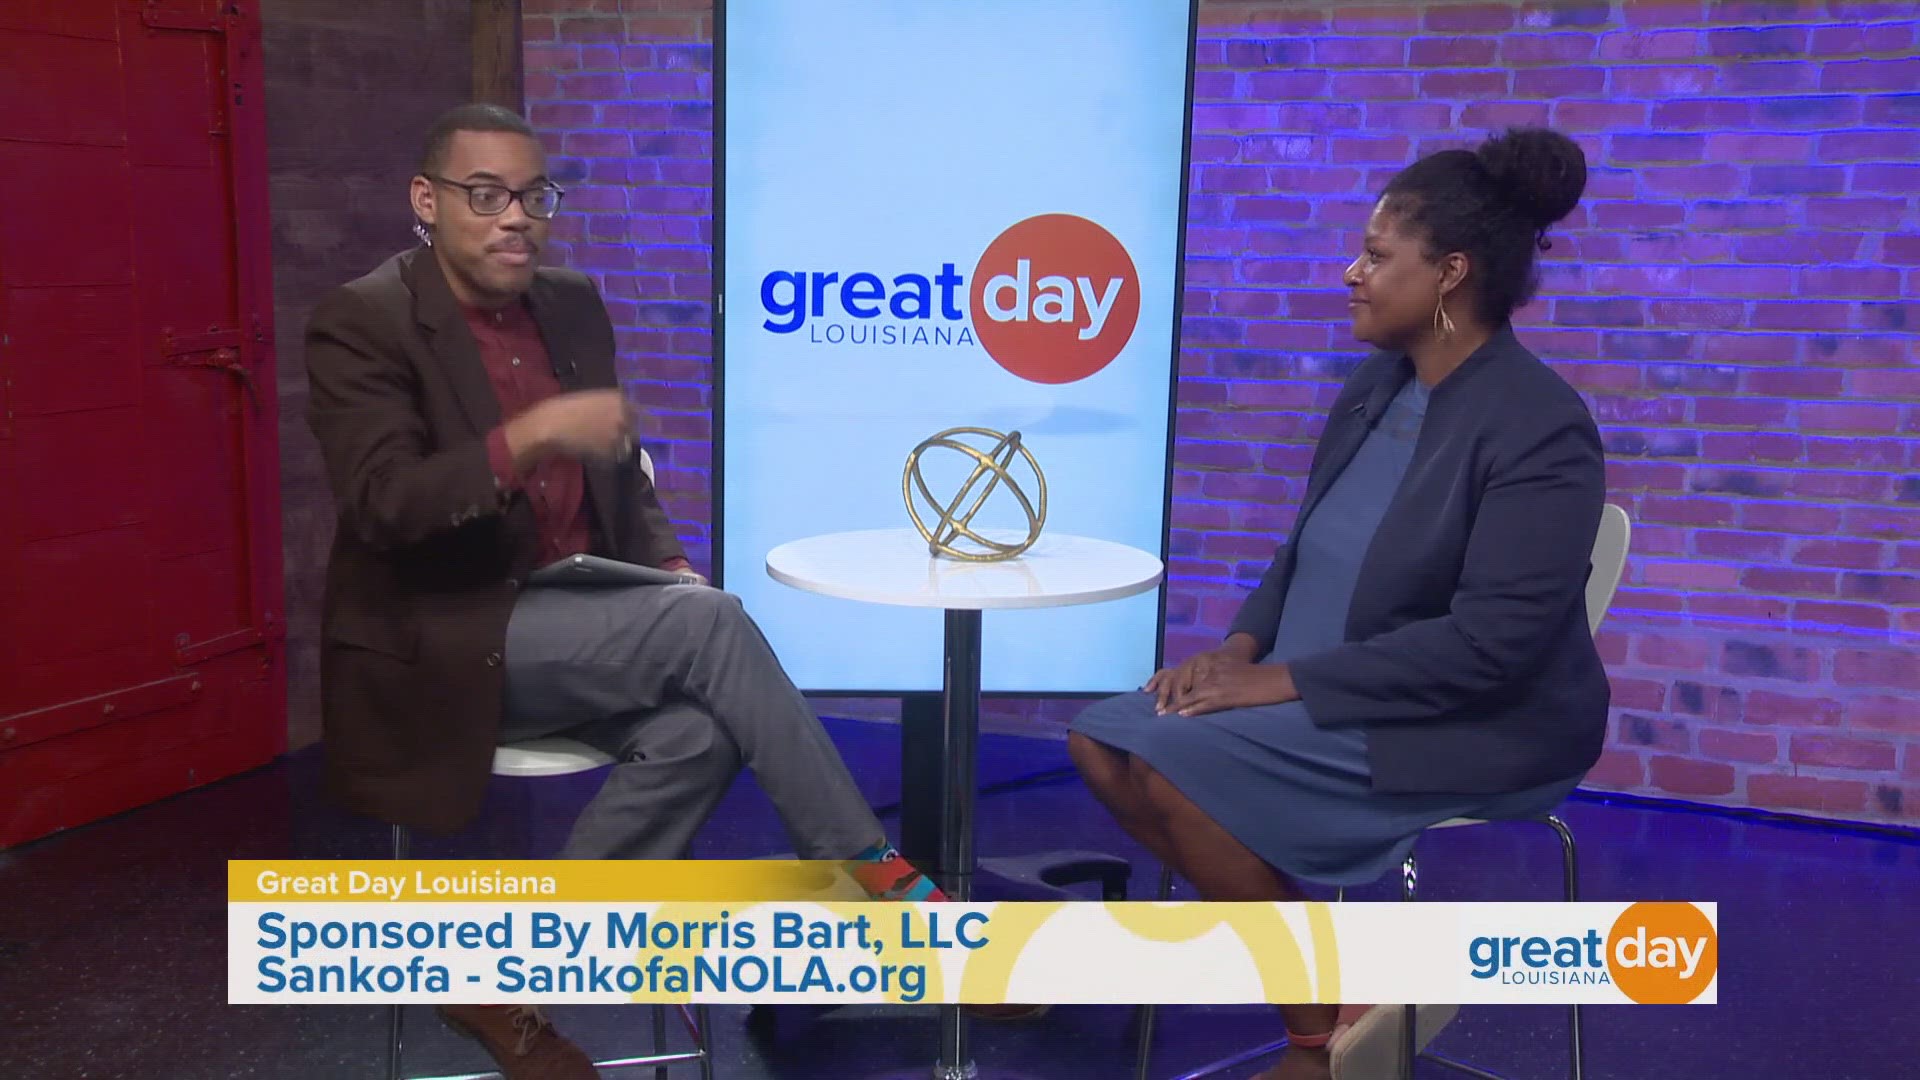 Morris Bart's Impact Give Back segment this month highlights the non-profit Sankofa that does work in Lower Ninth Ward community in New Orleans.